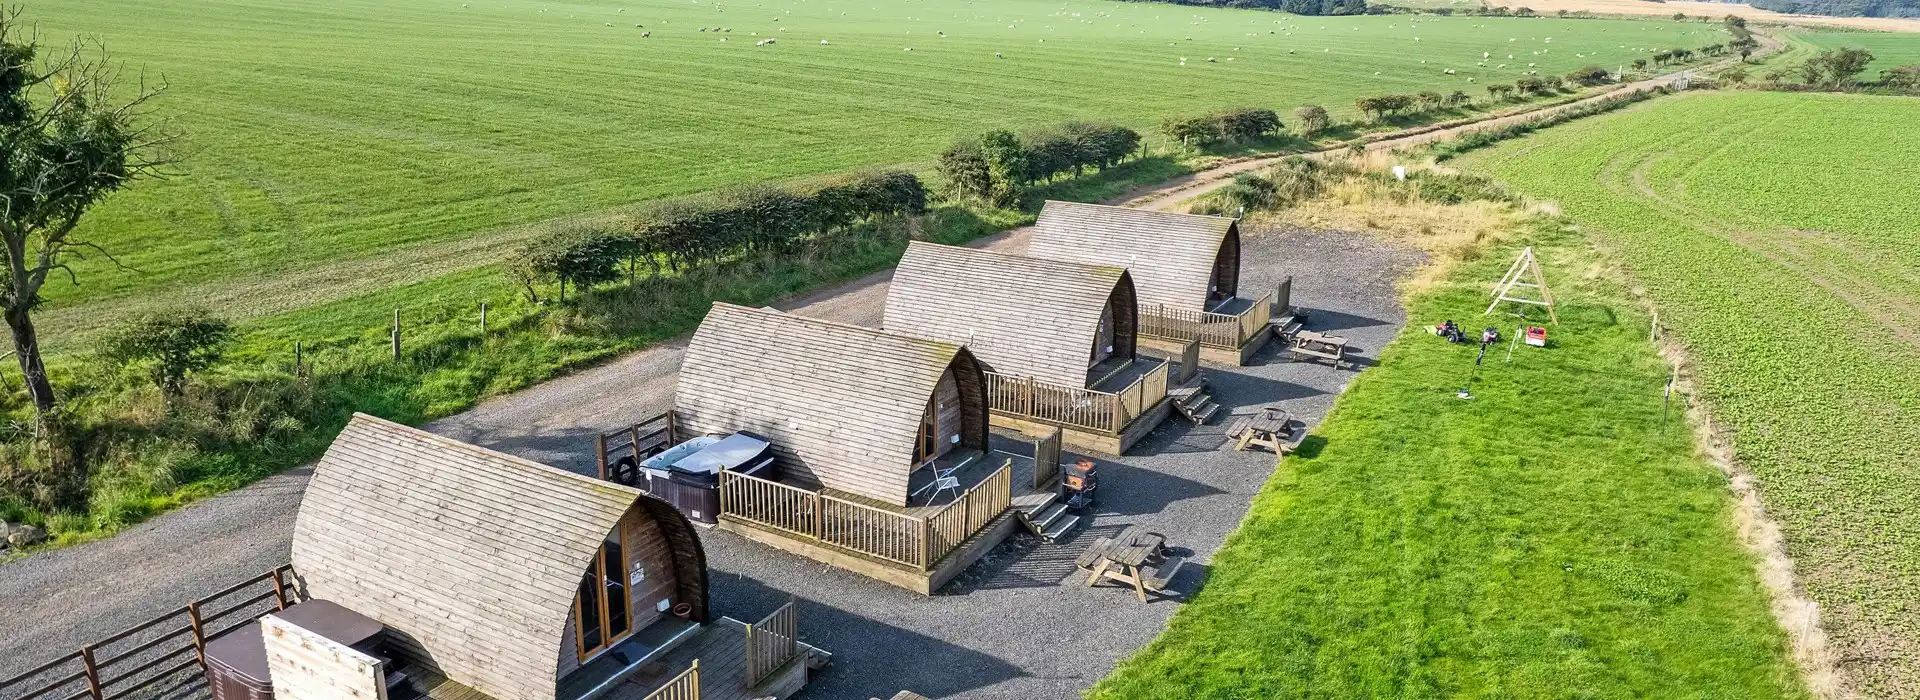 Edinburgh camping and glamping pods with hot tubs